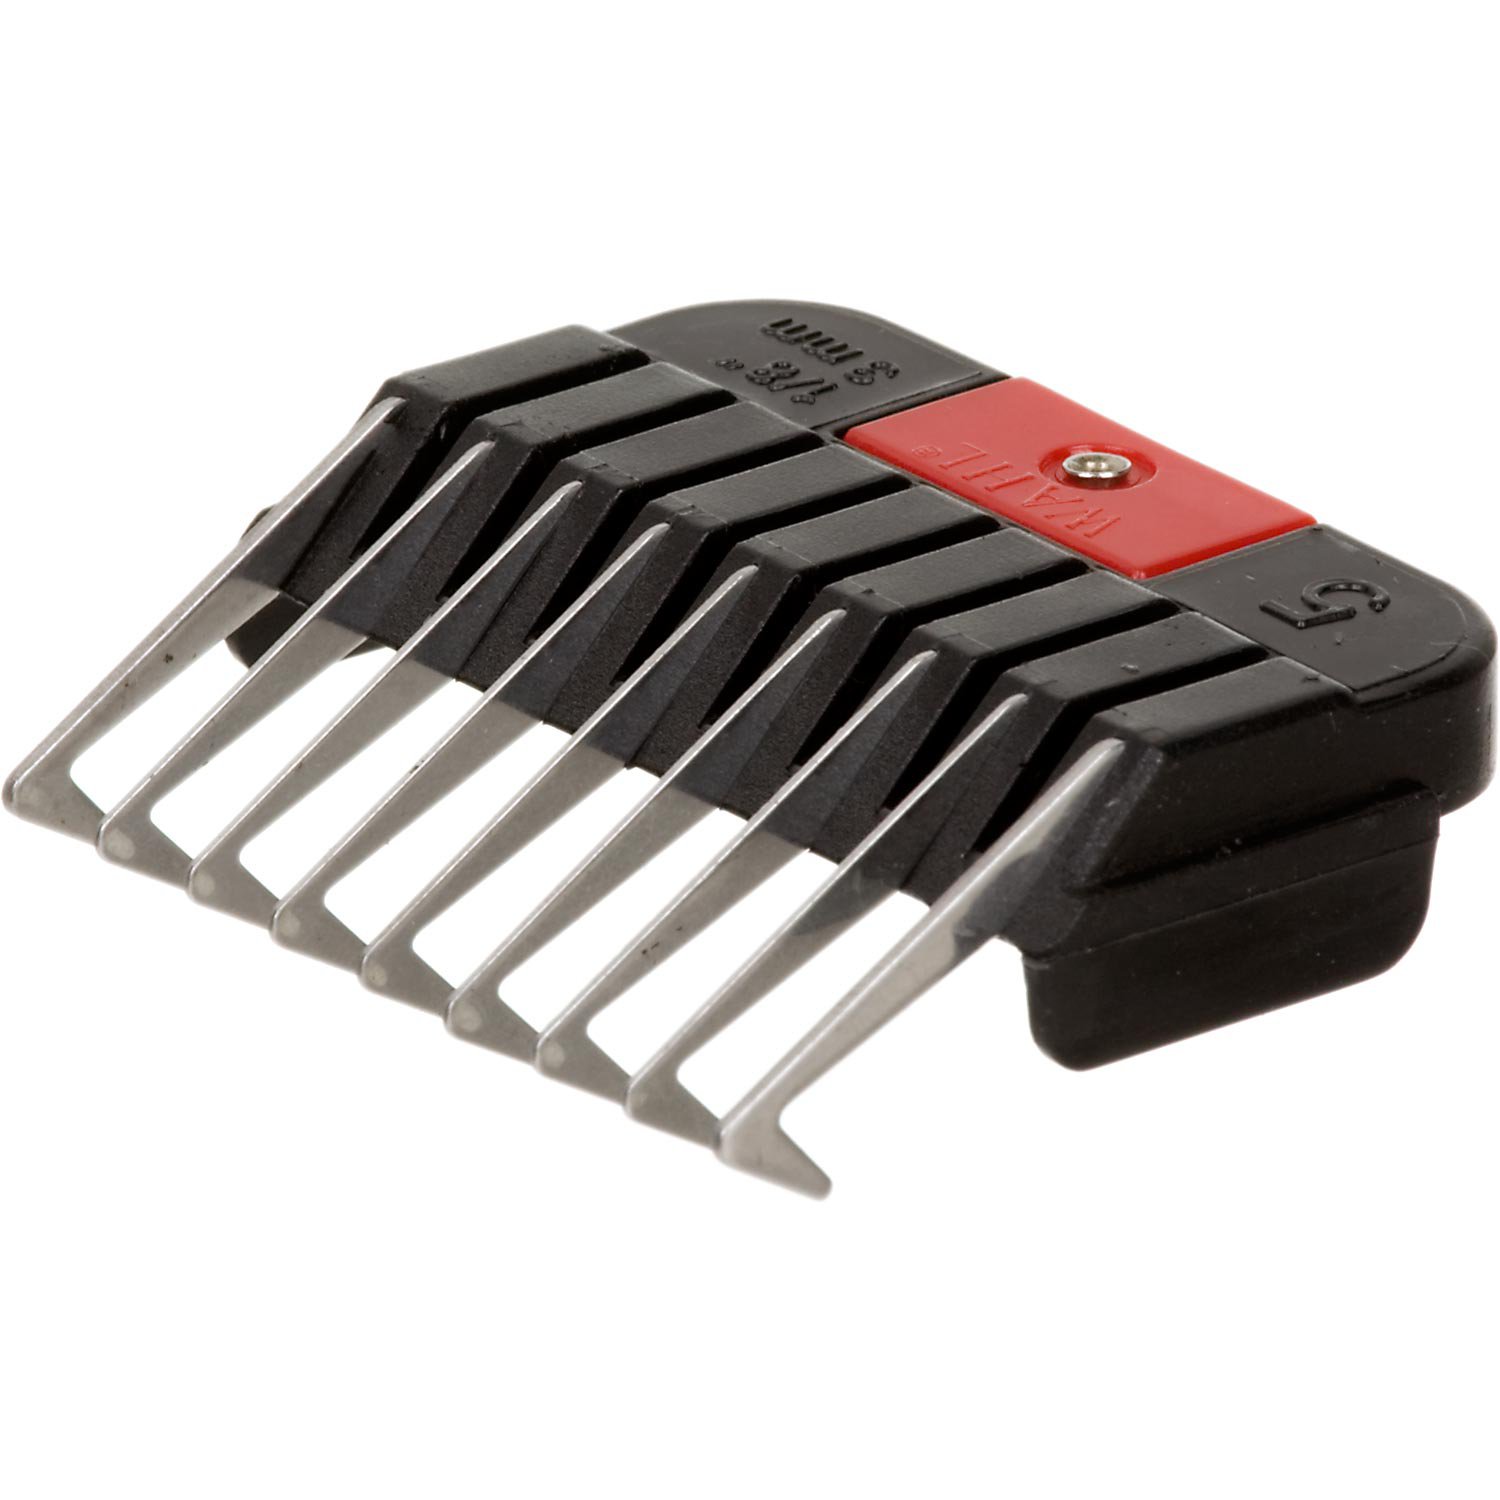 Wahl Stainless Steel Attachment Guide Combs